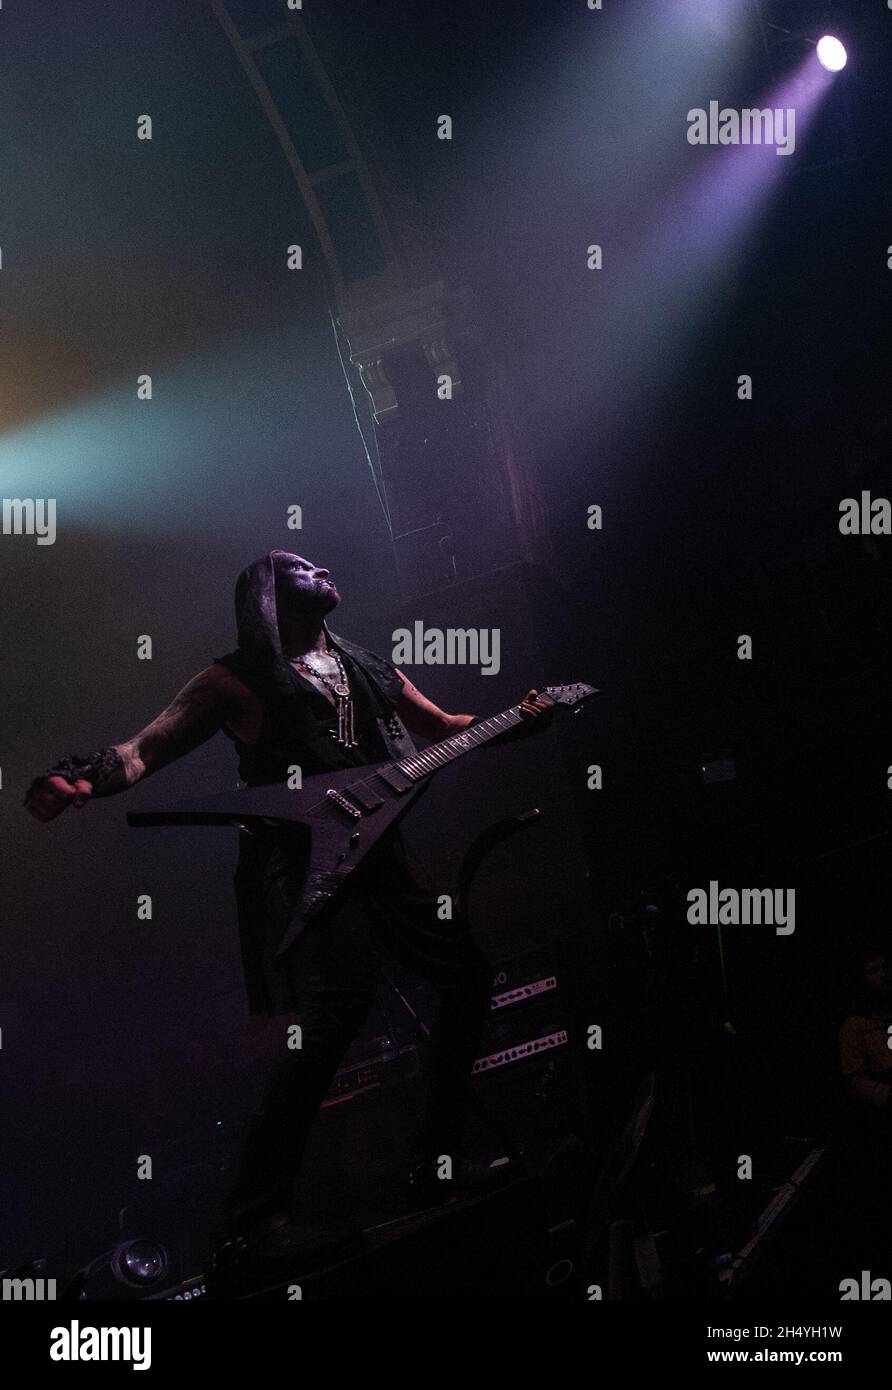 Nergal of Polish black metal band Behemoth performs on stage at O2 Institute on 07 February 2019 in Birmingham, England. Picture date: Thursday 07 February, 2019. Photo credit: Katja Ogrin/ EMPICS Entertainment. Stock Photo